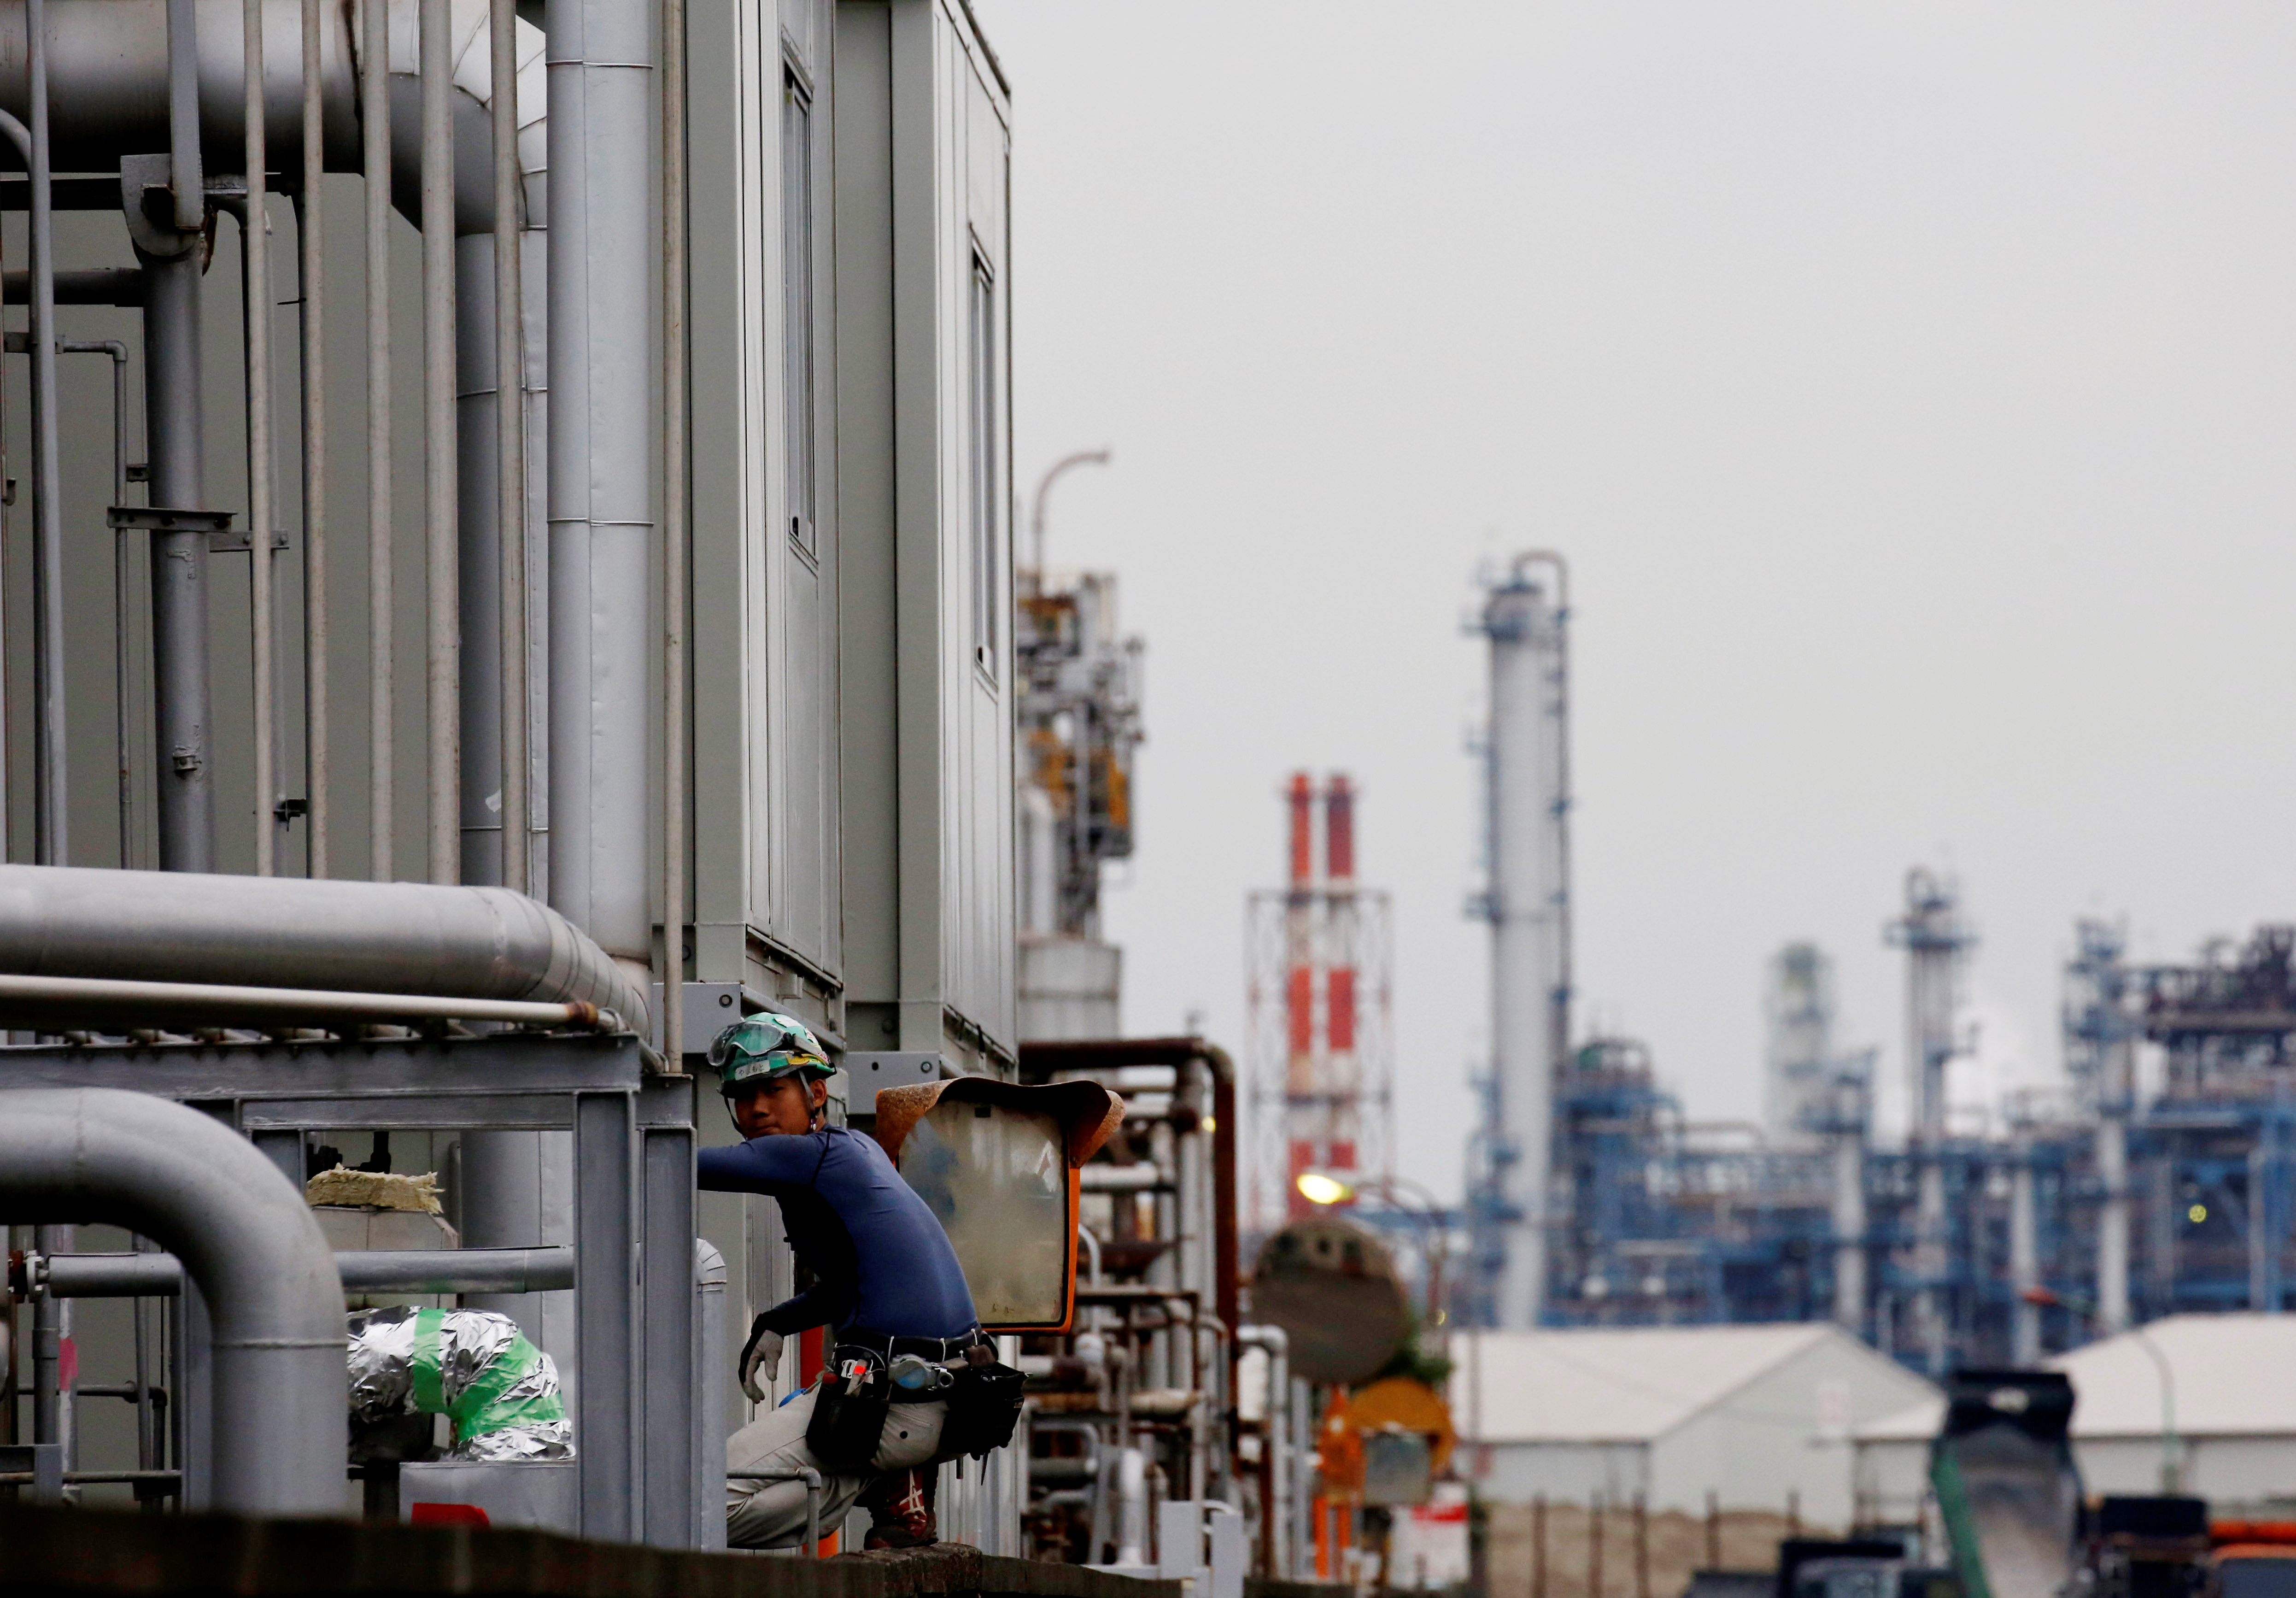 A worker is seen in front of facilities and chimneys of factories at the Keihin Industrial Zone in Kawasaki